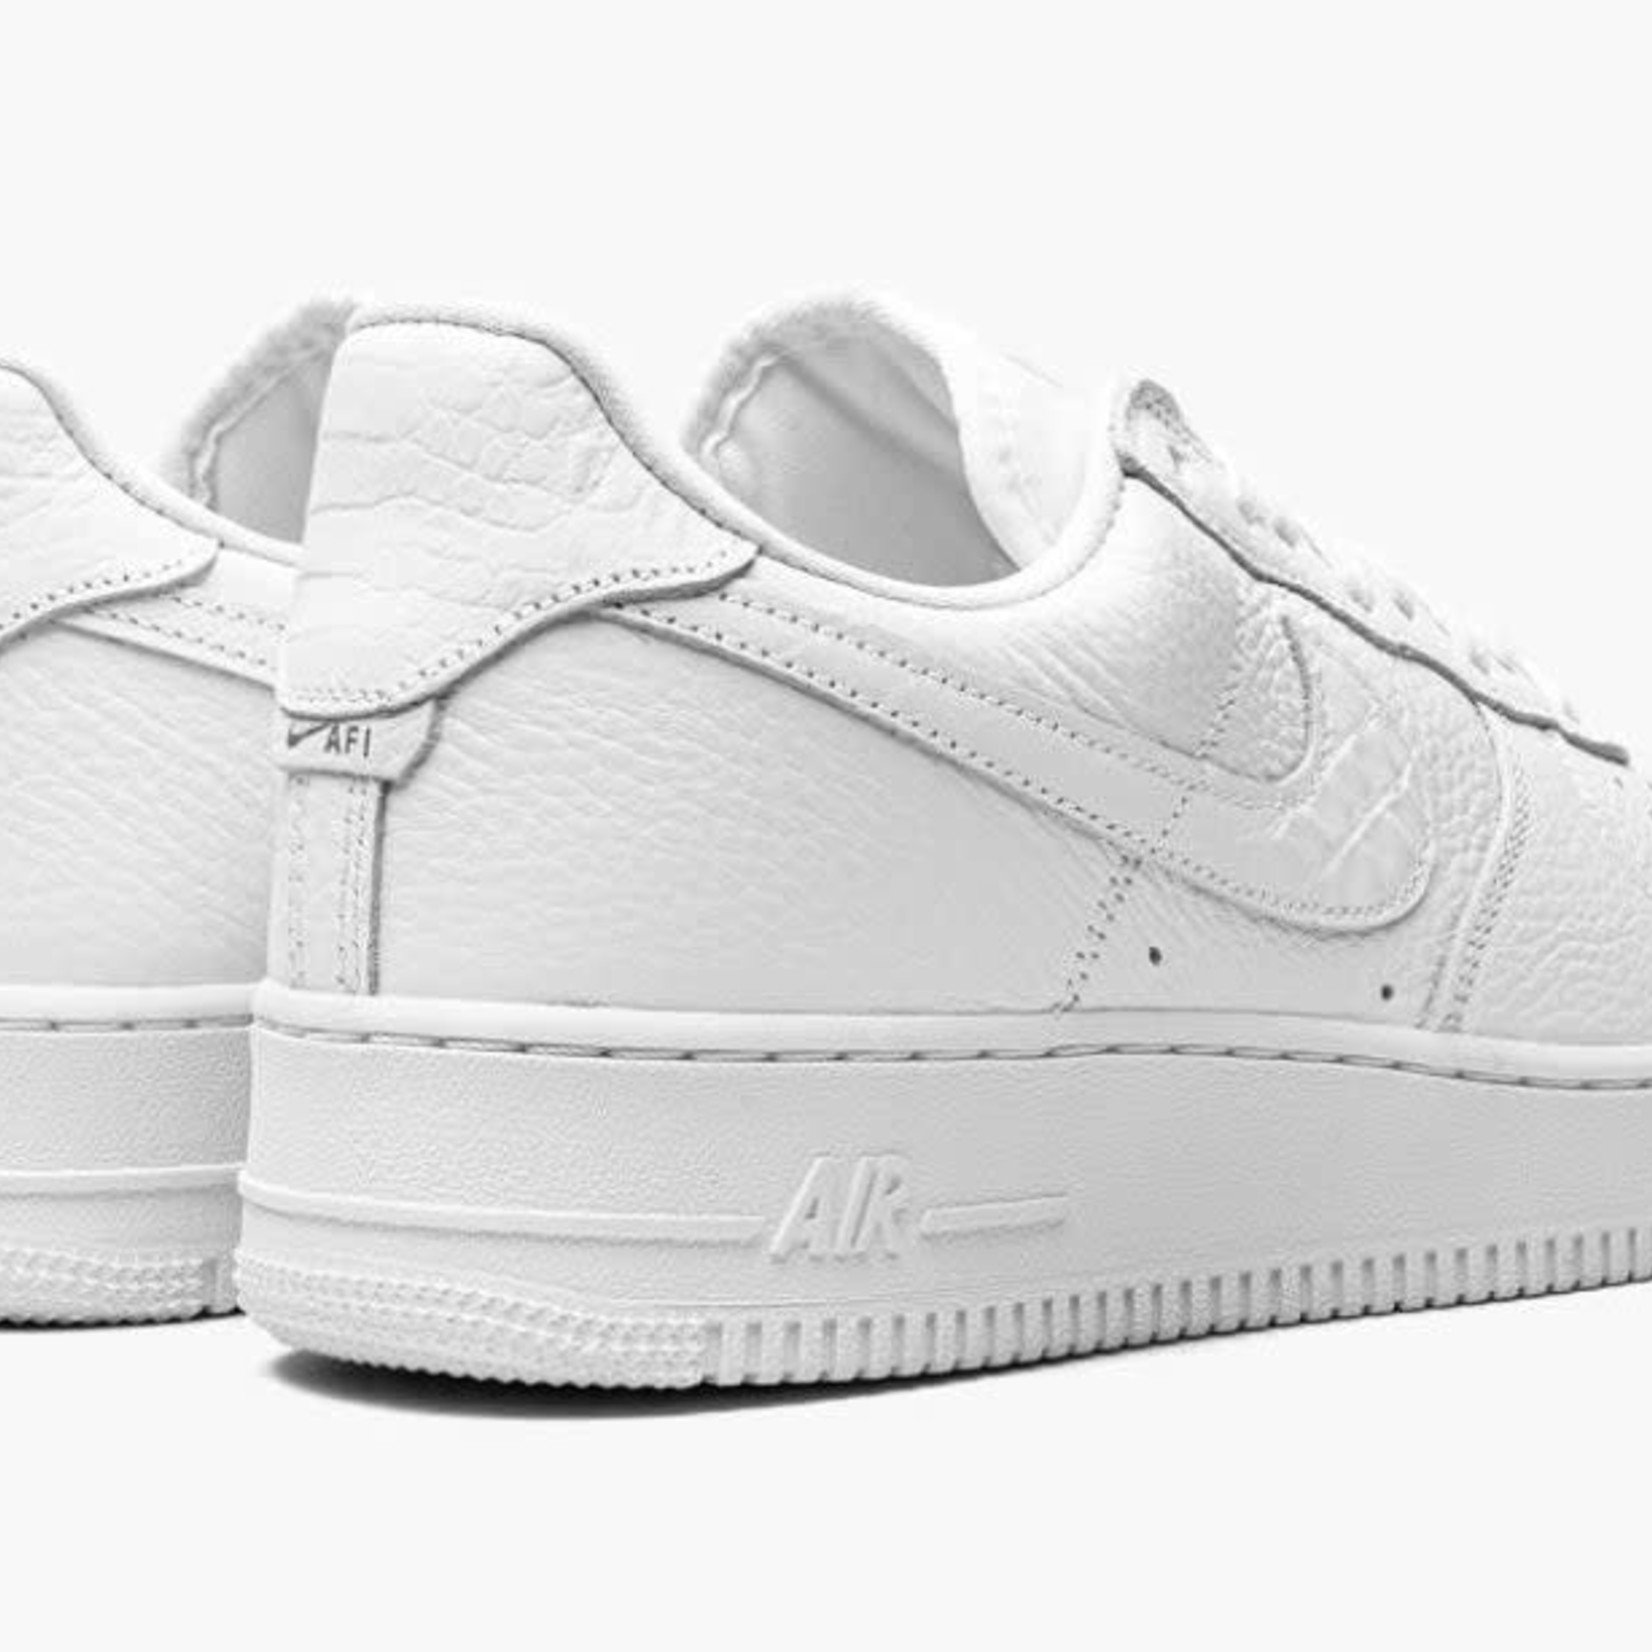 Nike Air Force 1 Low '07 Craft "Triple White"